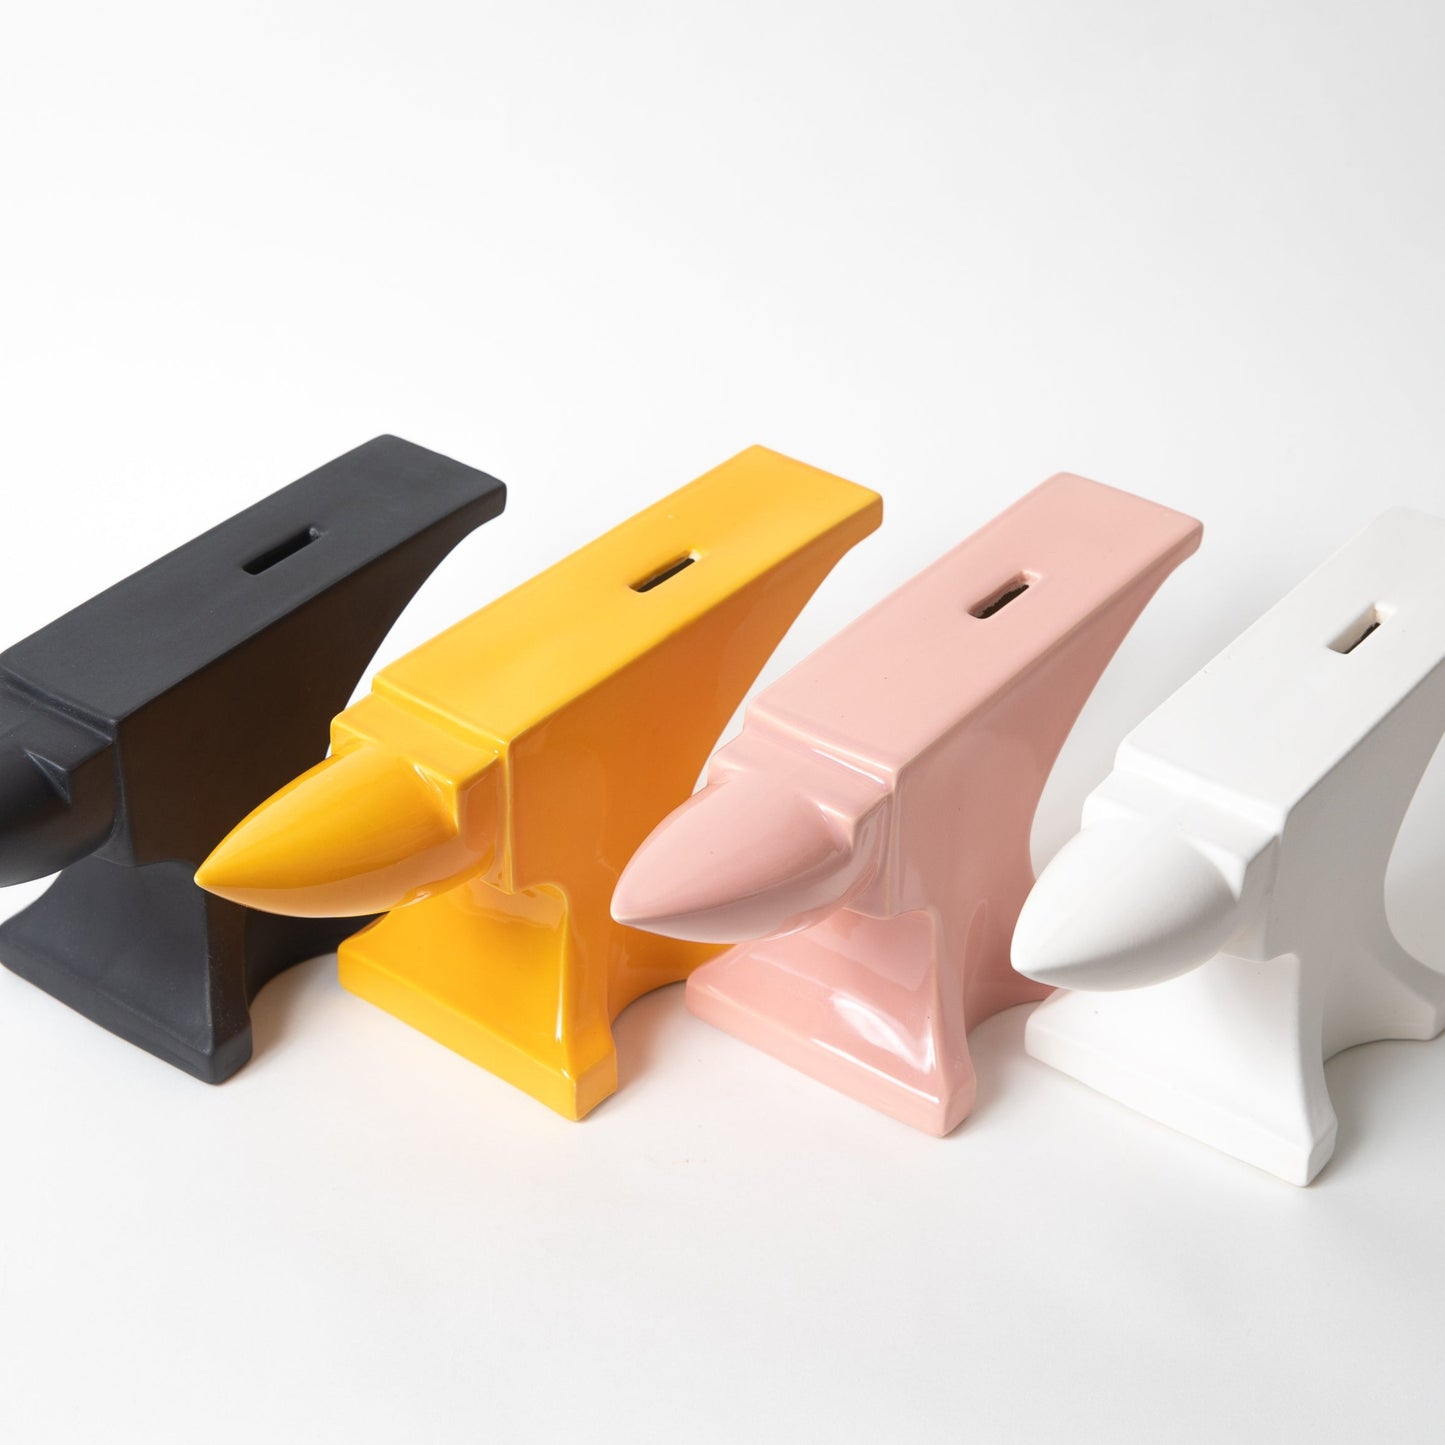 Ceramic Anvil Coin Banks in a variety of colors.